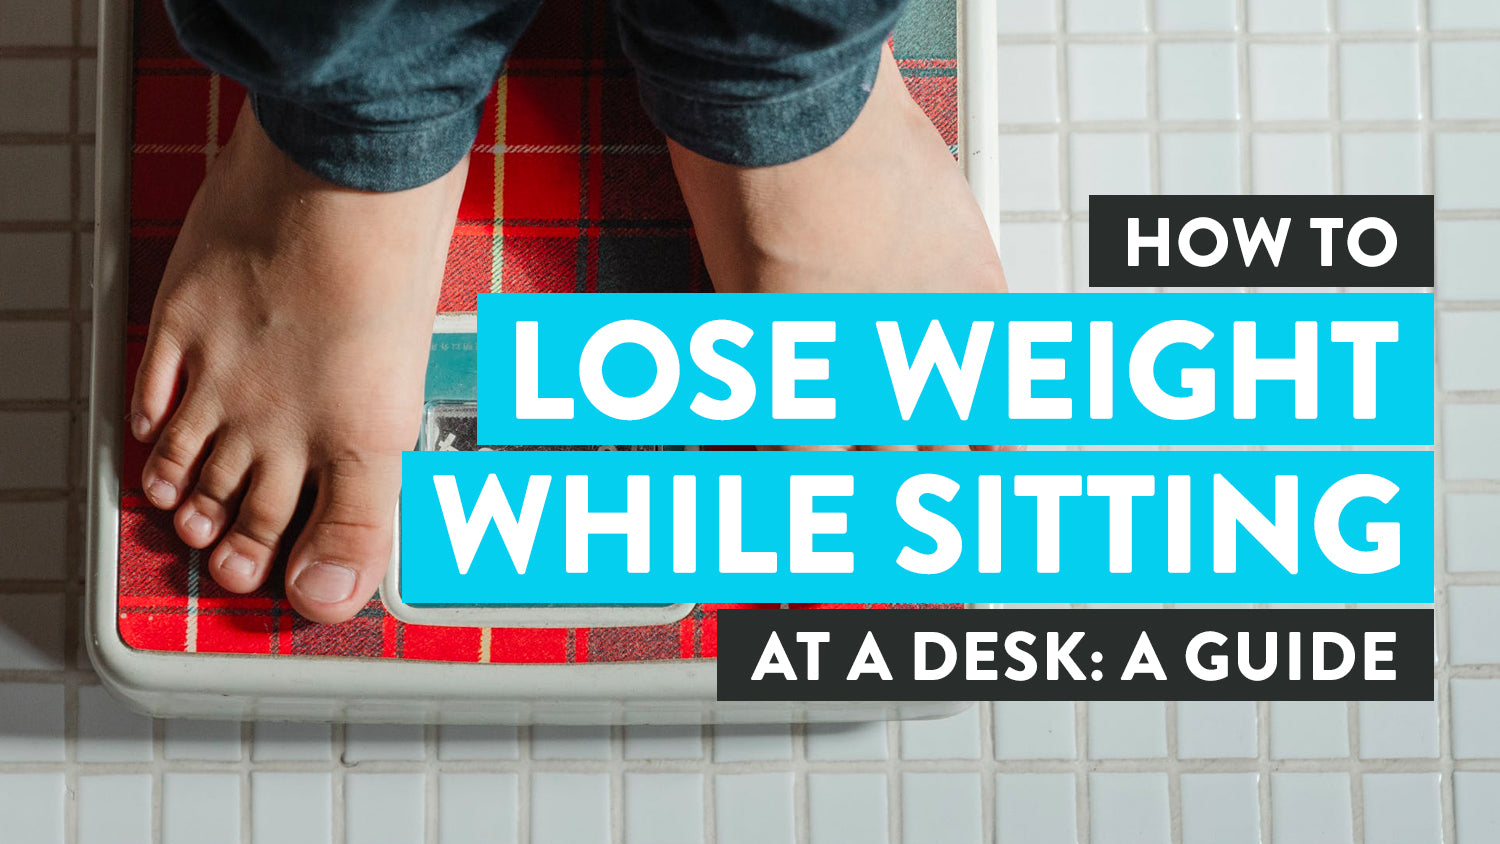 http://desky.com.au/cdn/shop/articles/How-To-Lose-Weight-While-Standing-At-A-Desk.jpg?v=1690348501